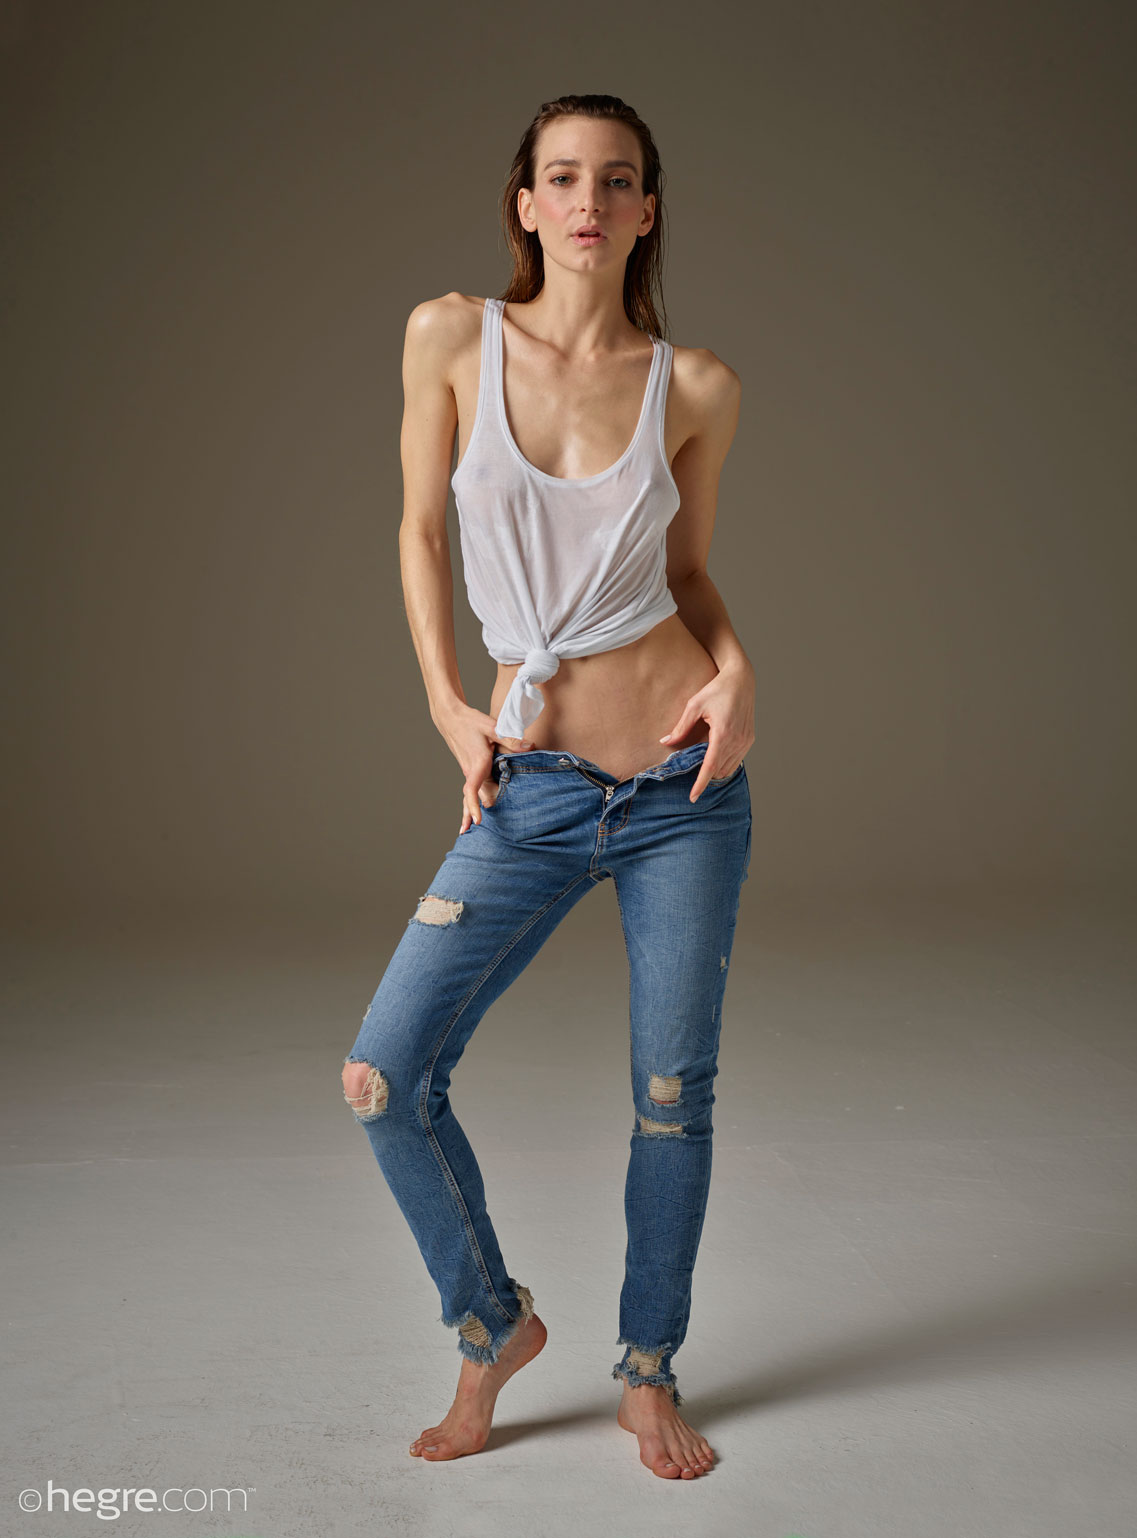 Flora in a Sexy Top and Jeans